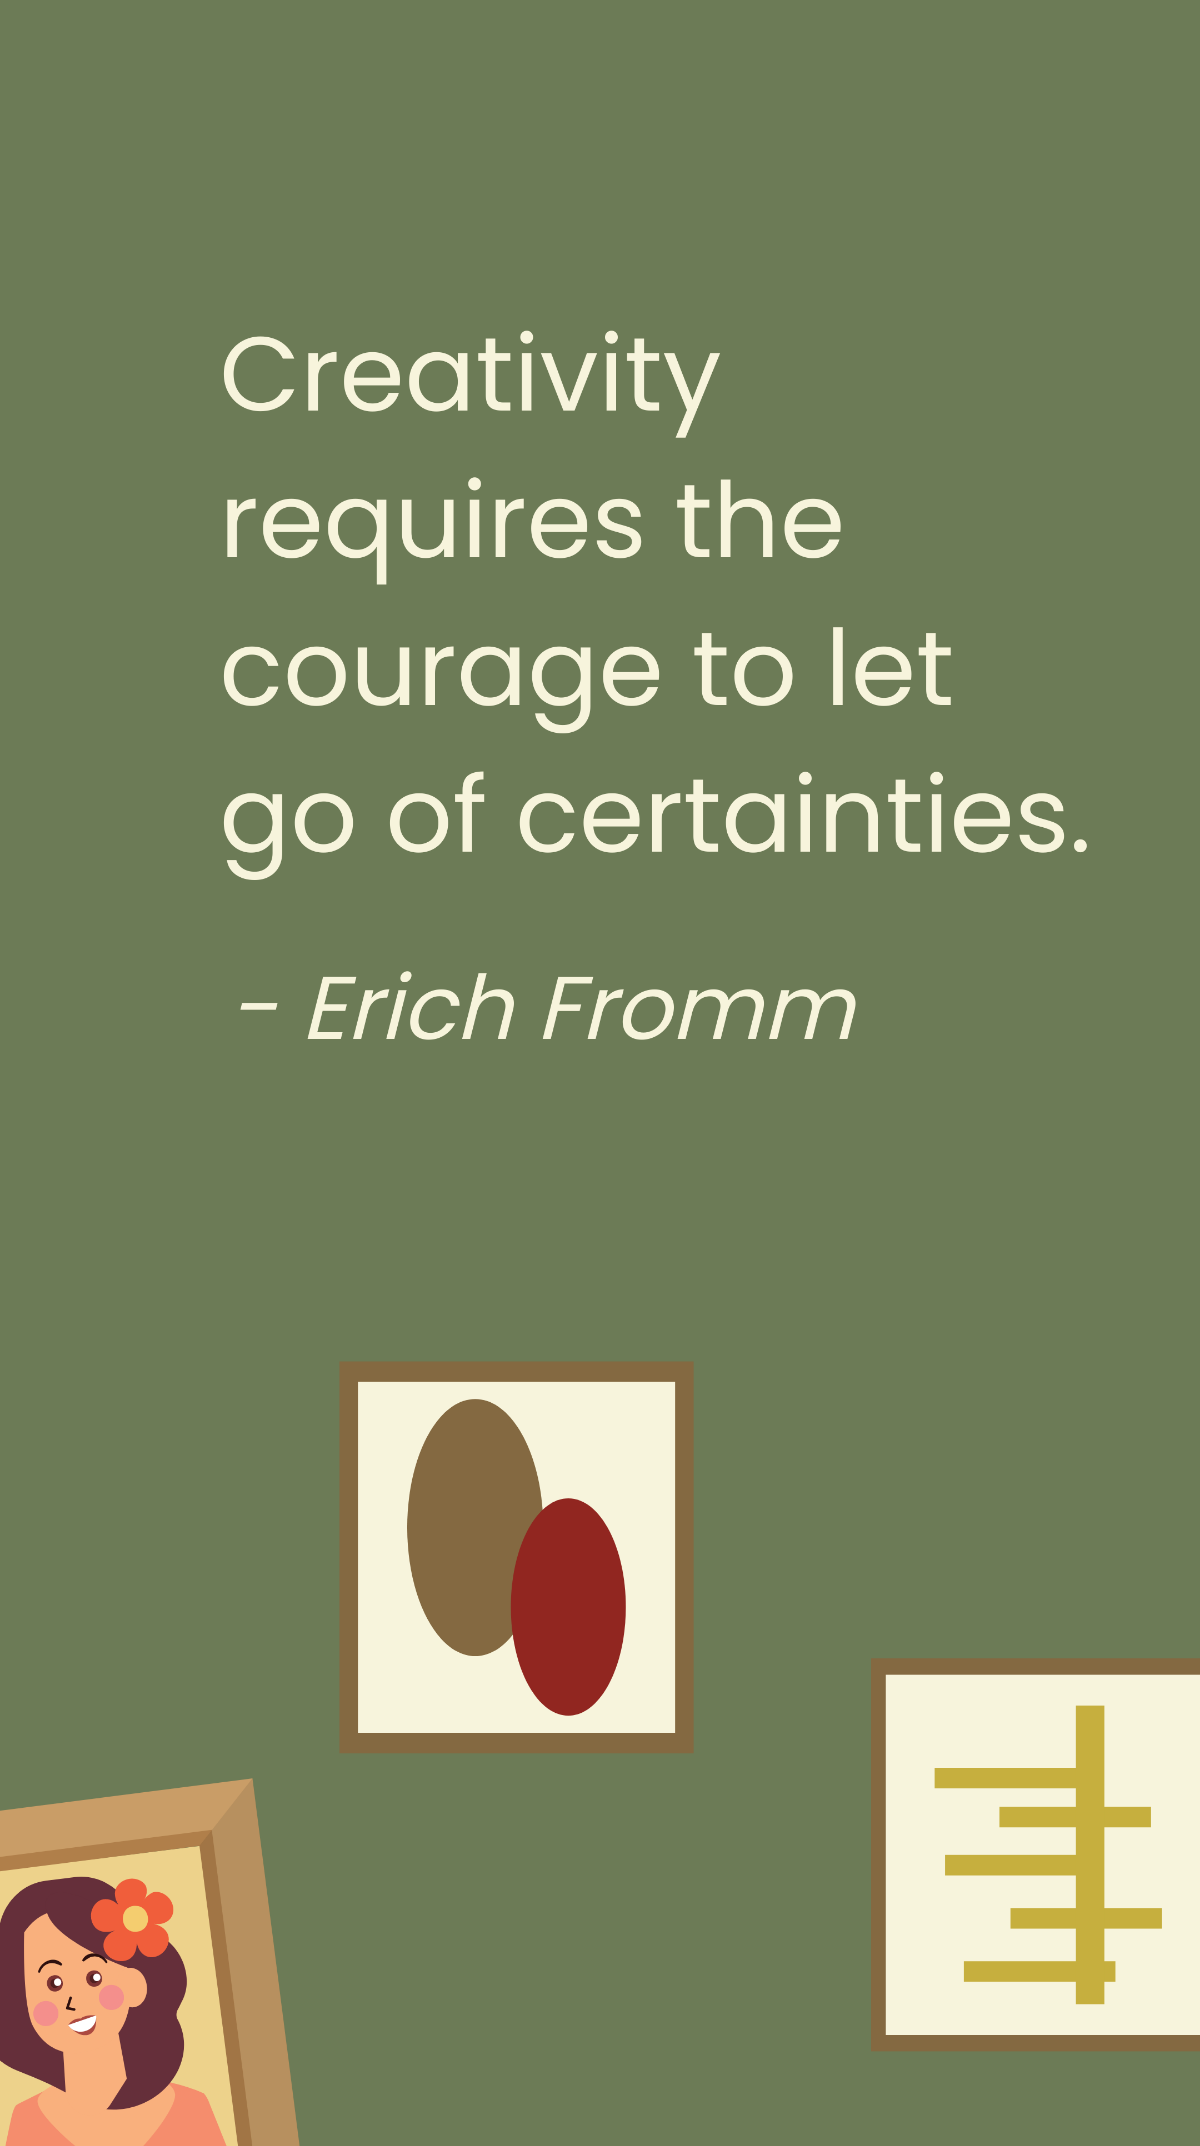 Free Erich Fromm - Creativity requires the courage to let go of certainties. Template